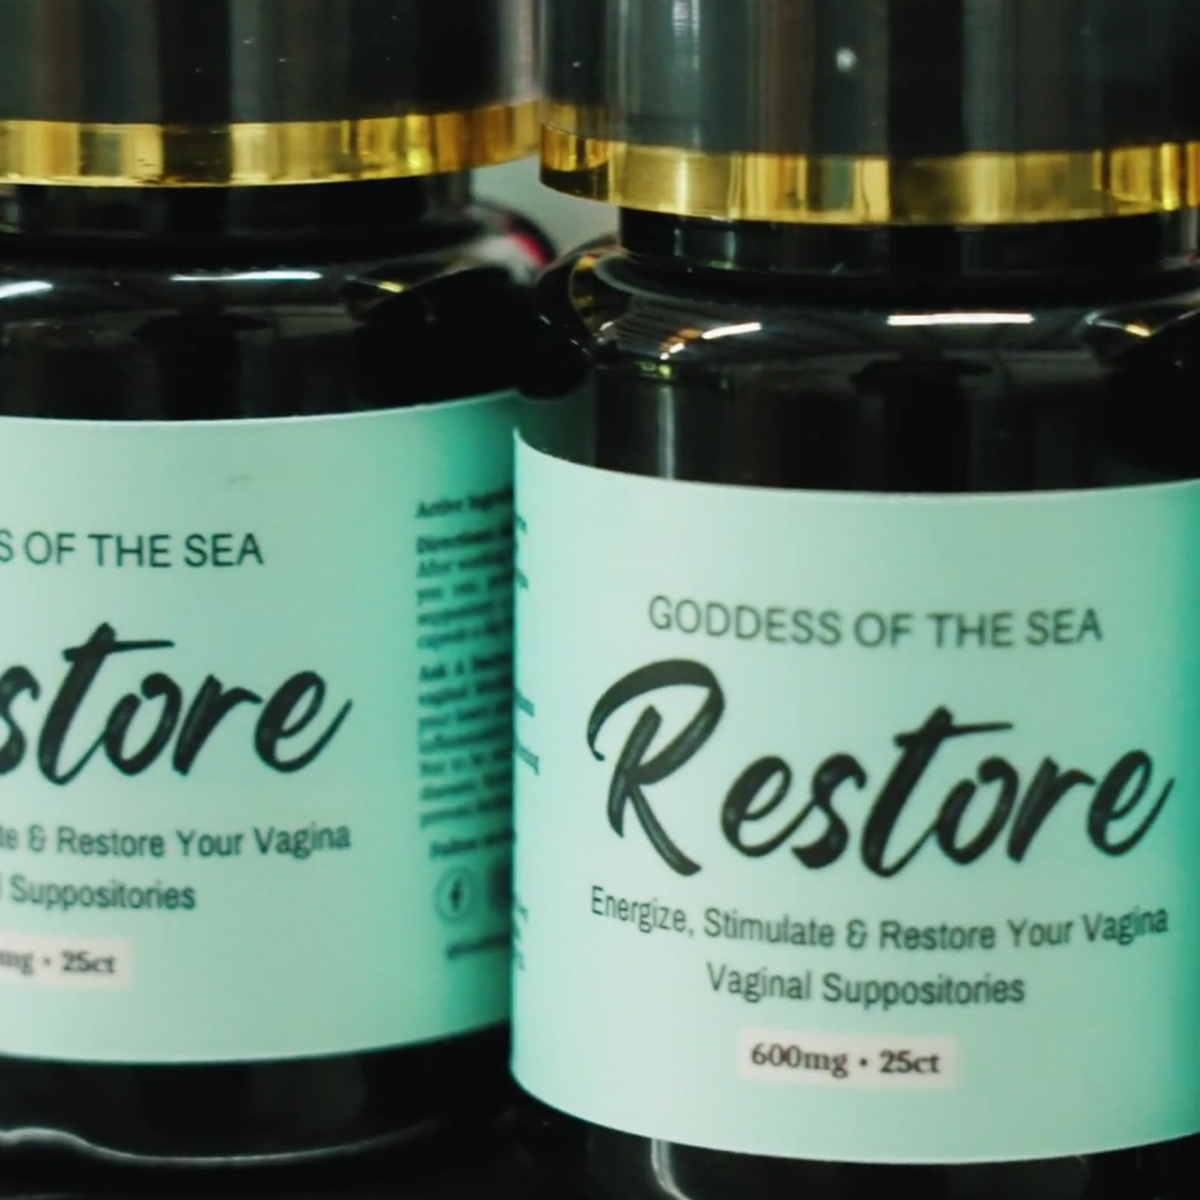 A close-up picture of Goddess of the Sea Restore, boric suppositories, in a green bottle.